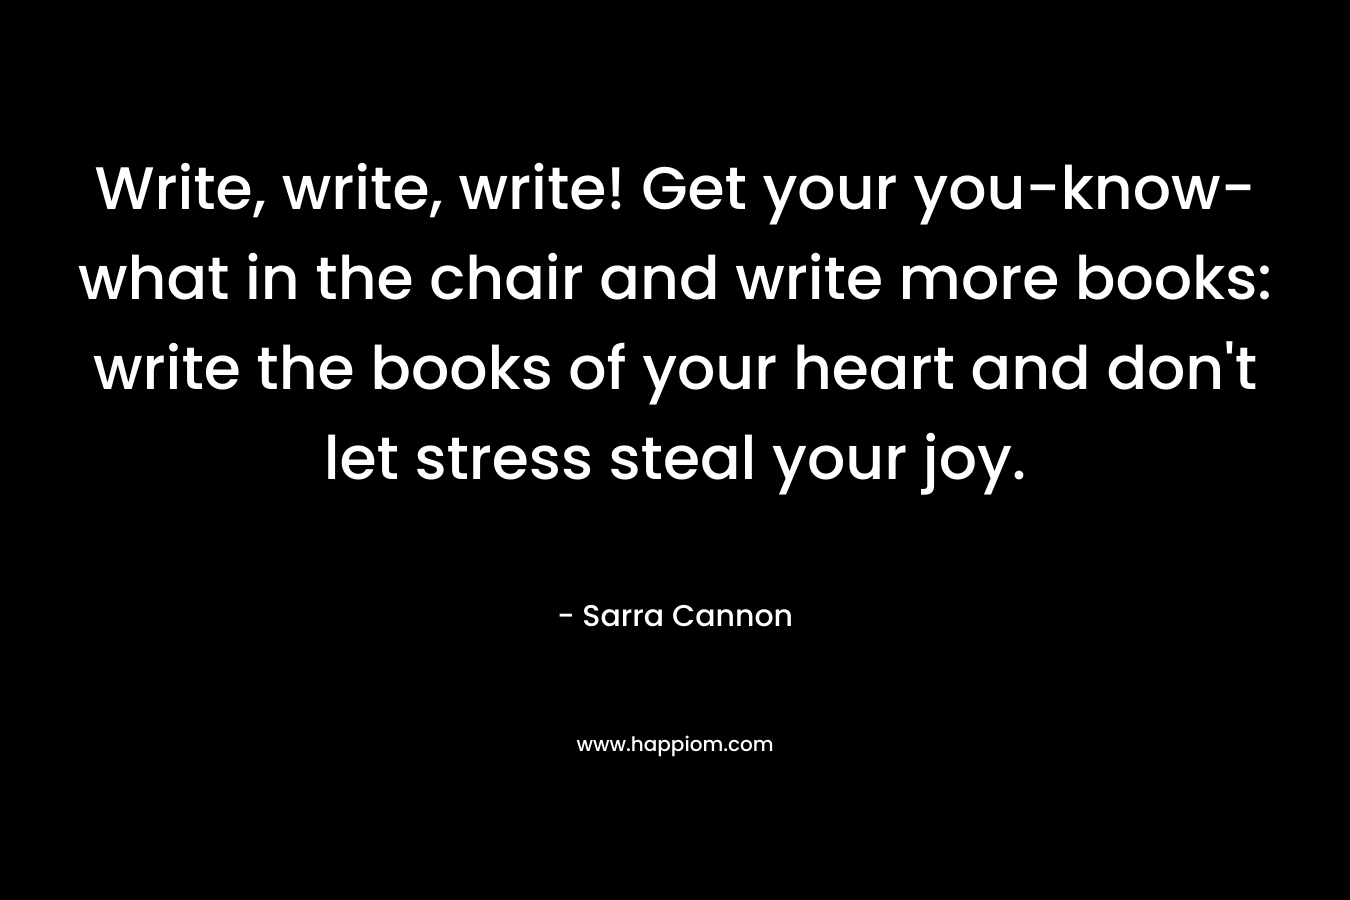 Write, write, write! Get your you-know-what in the chair and write more books: write the books of your heart and don't let stress steal your joy.